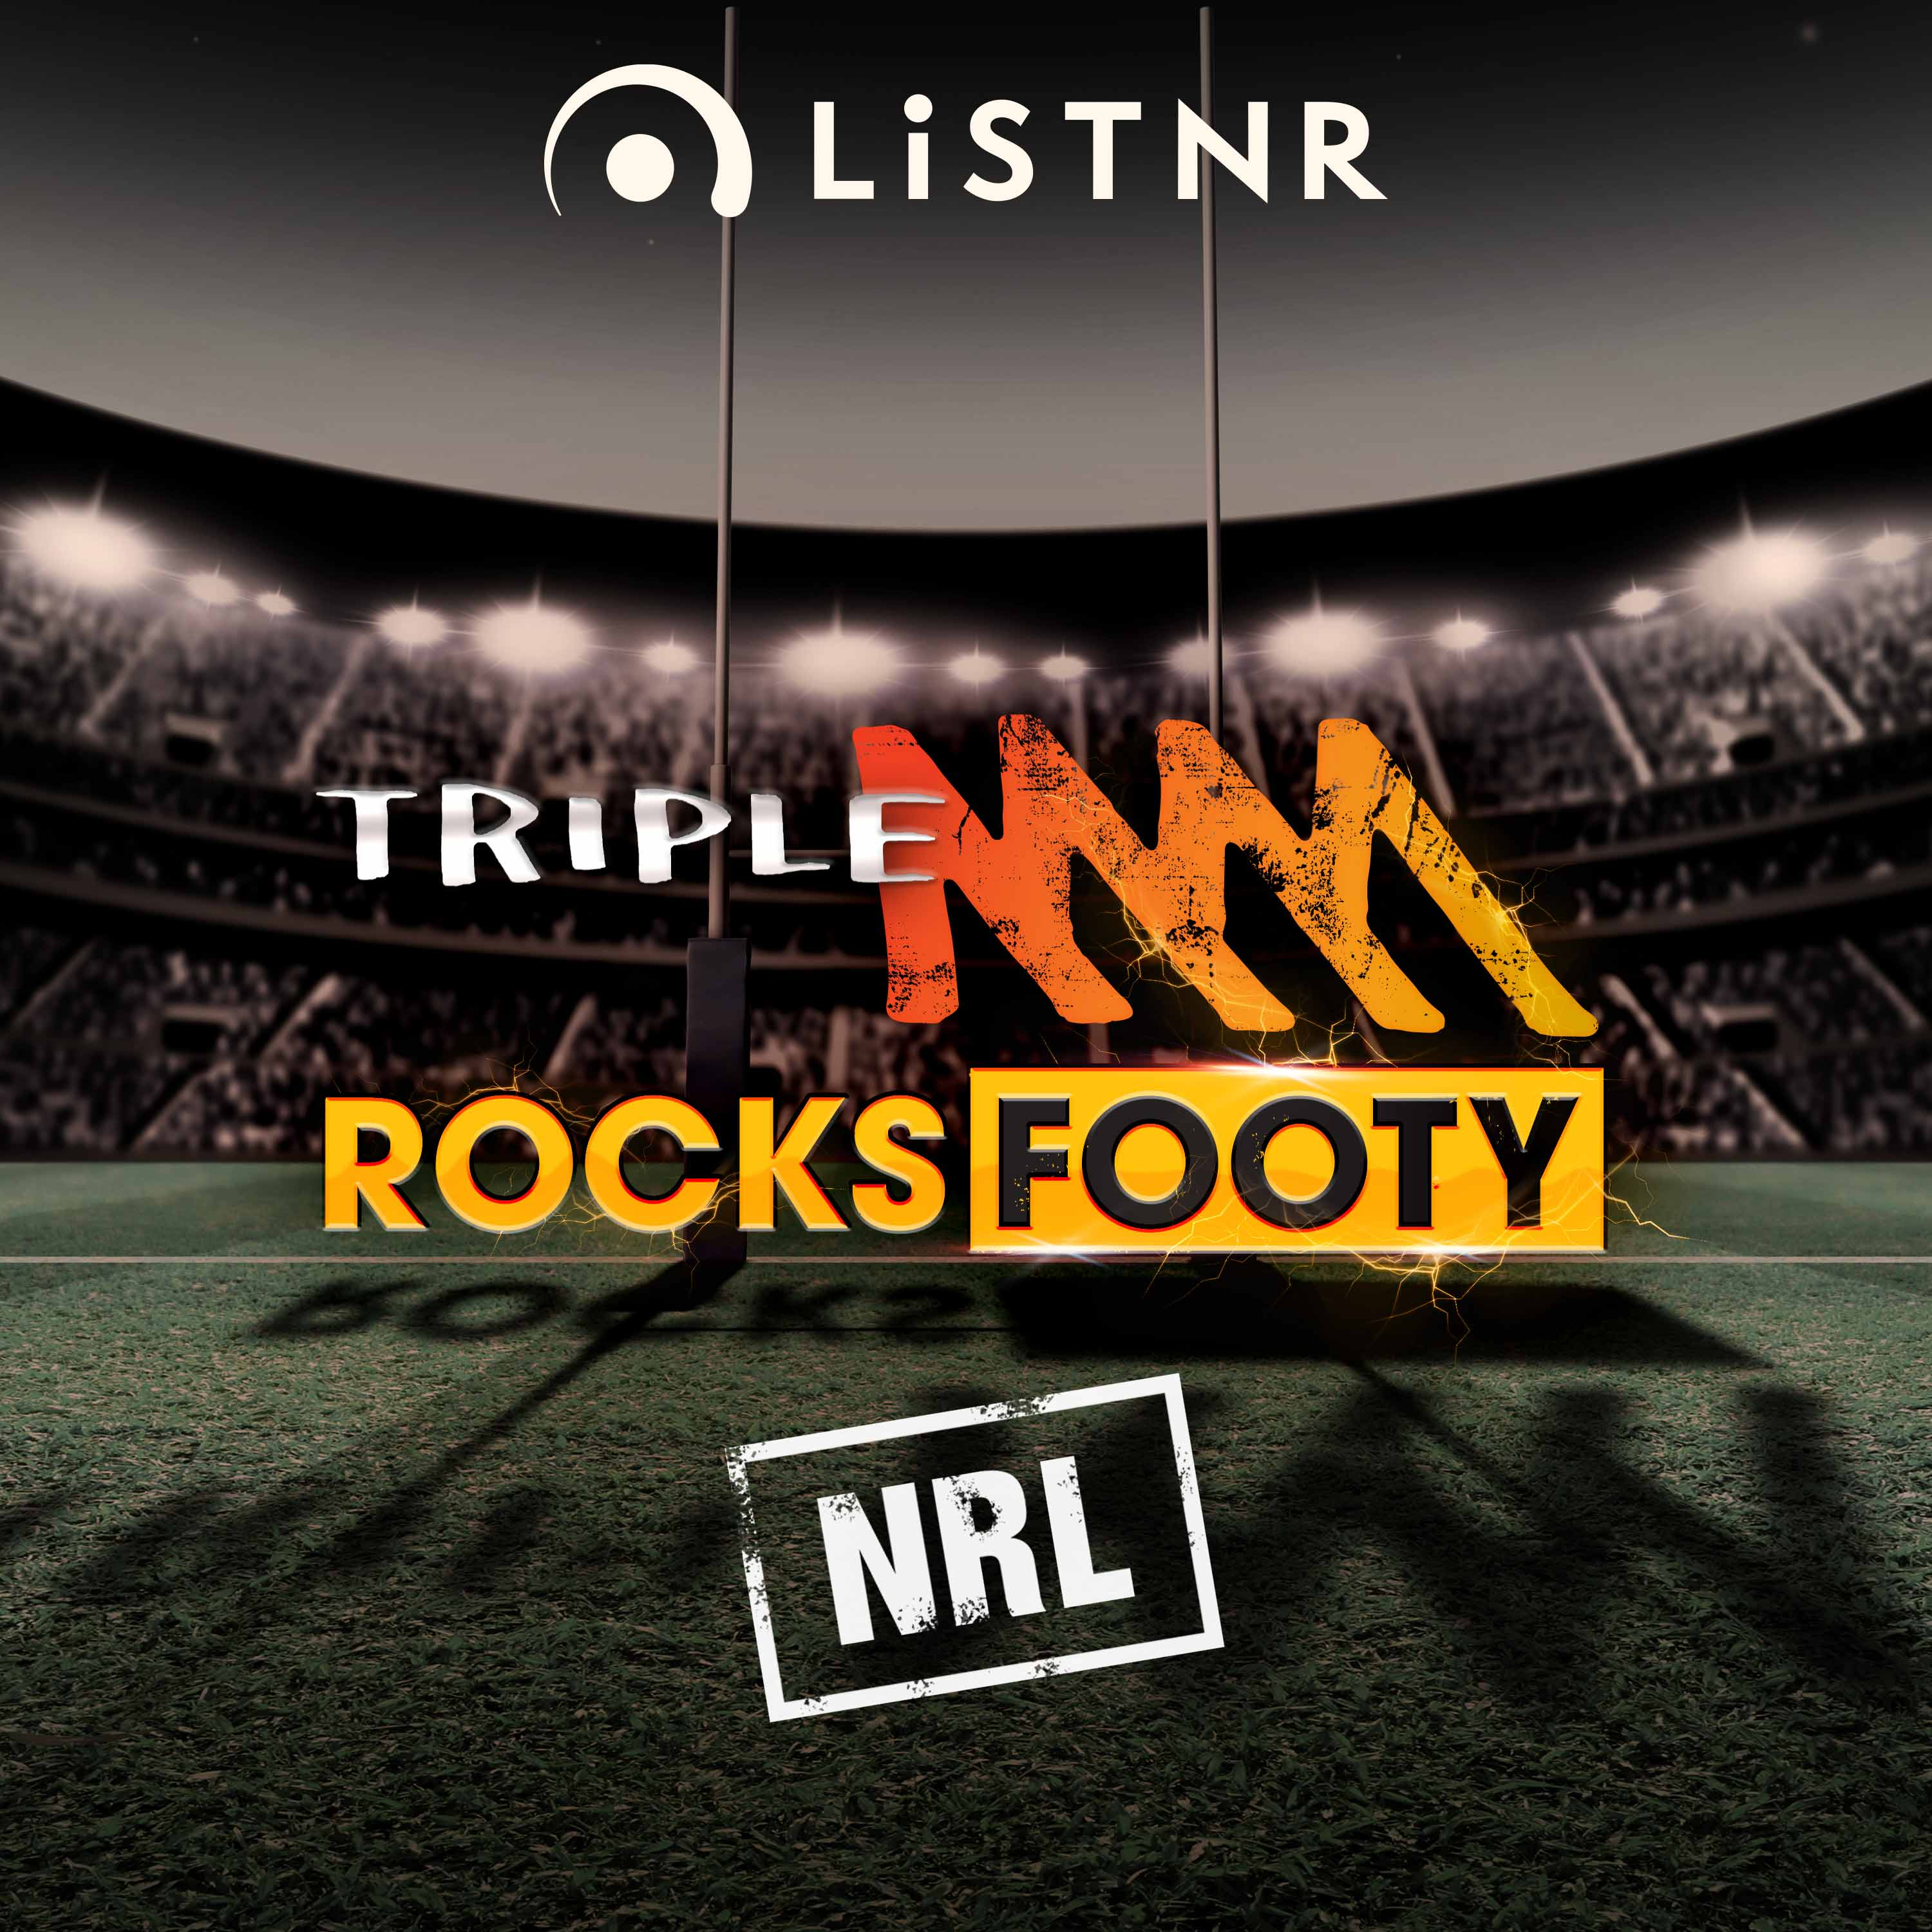 Saturday Scrum | Unpacking A Wet, Wild & Chaotic Night Of Footy, Latest On Zac Lomax, Solving The Tigers Halves Conundrum & Kalyn Ponga Joins The Show!